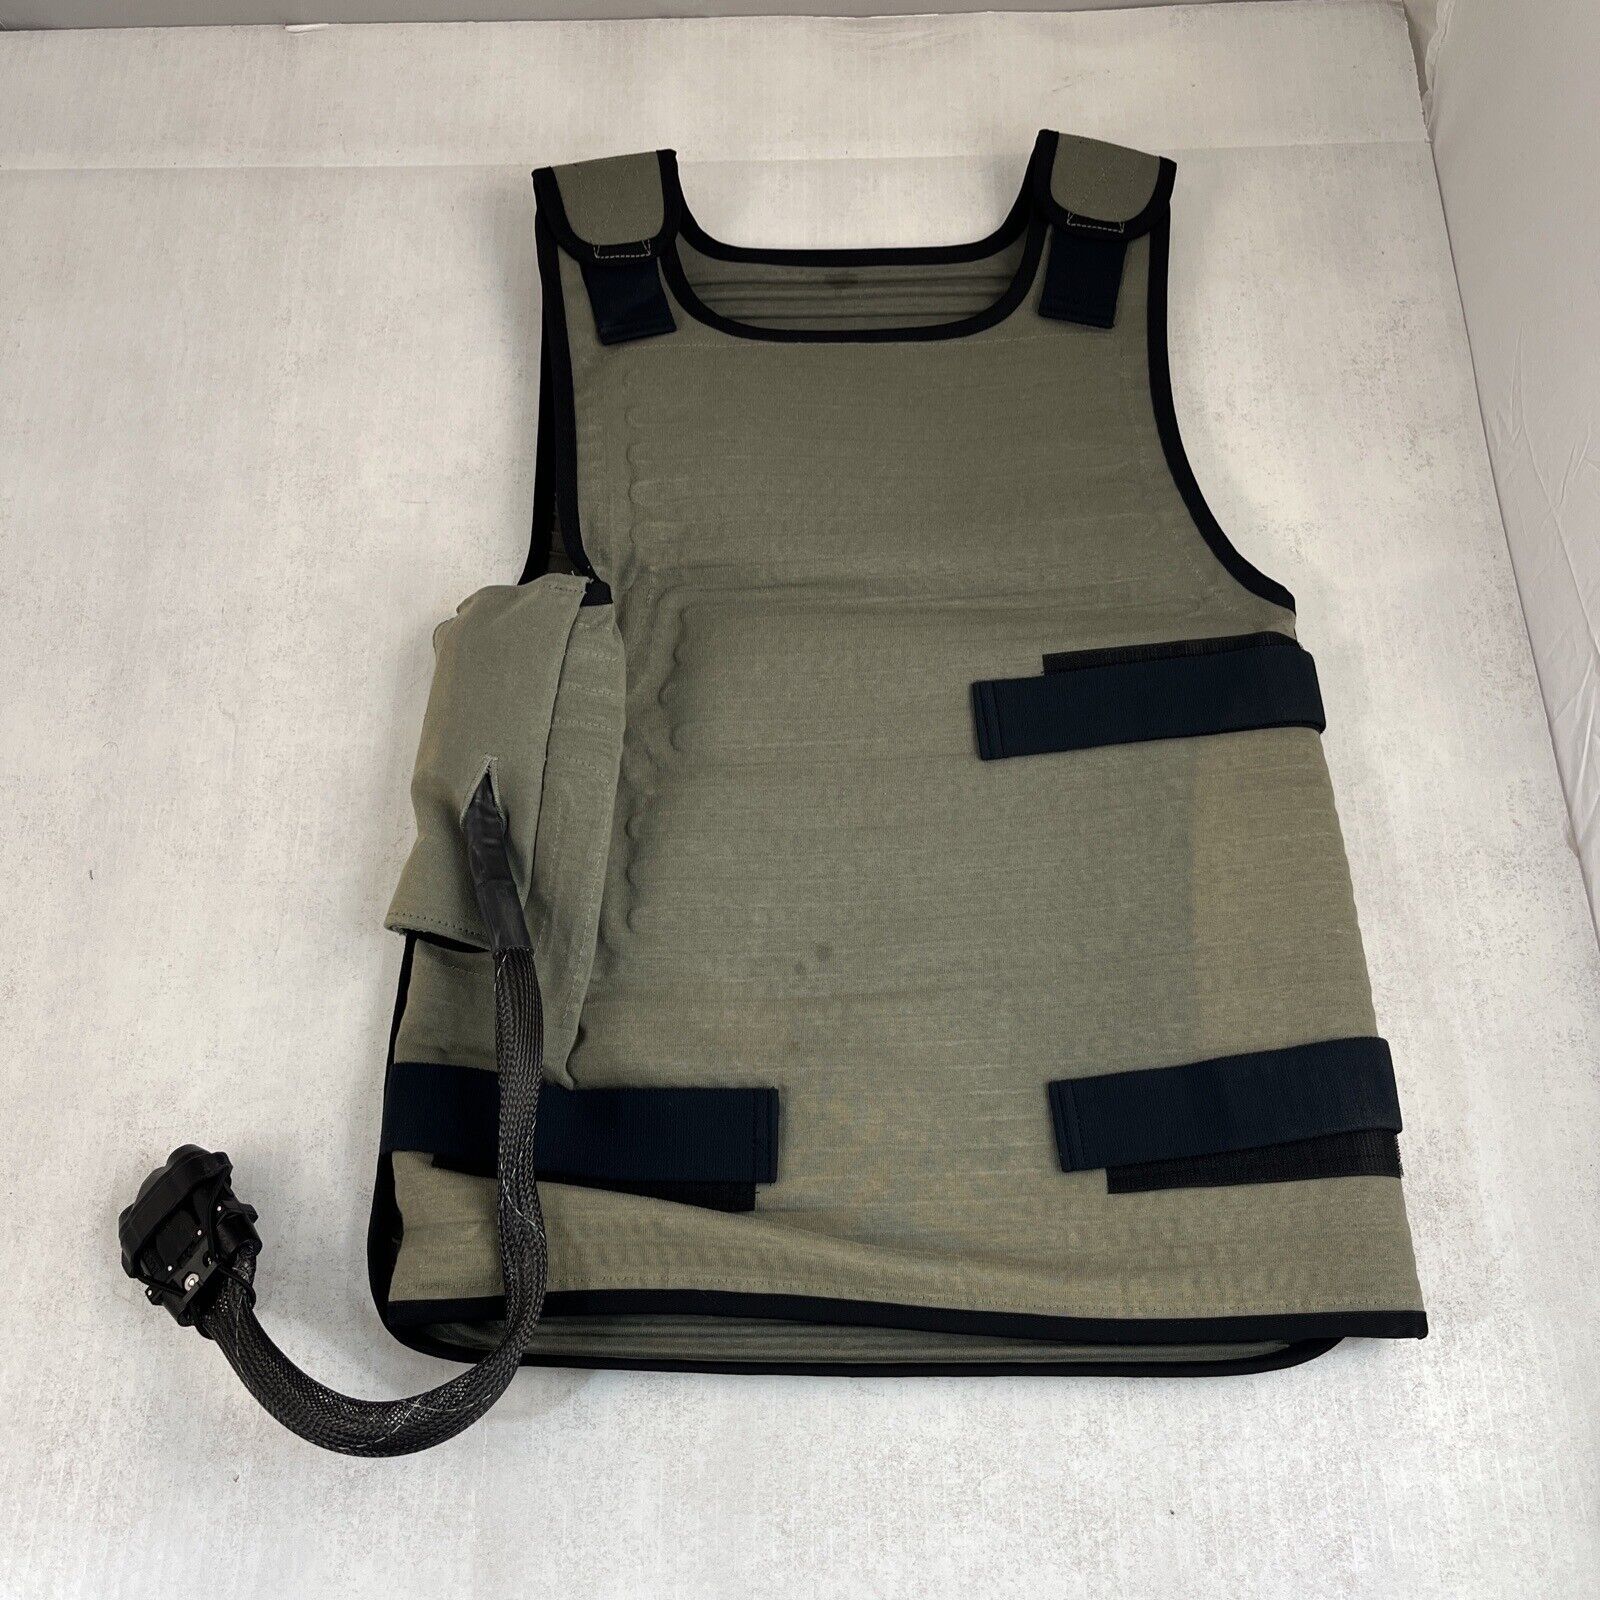 Allen Vanguard  AIR WARRIOR  Micro Climate Cooling Vest Garment Small Right Hand